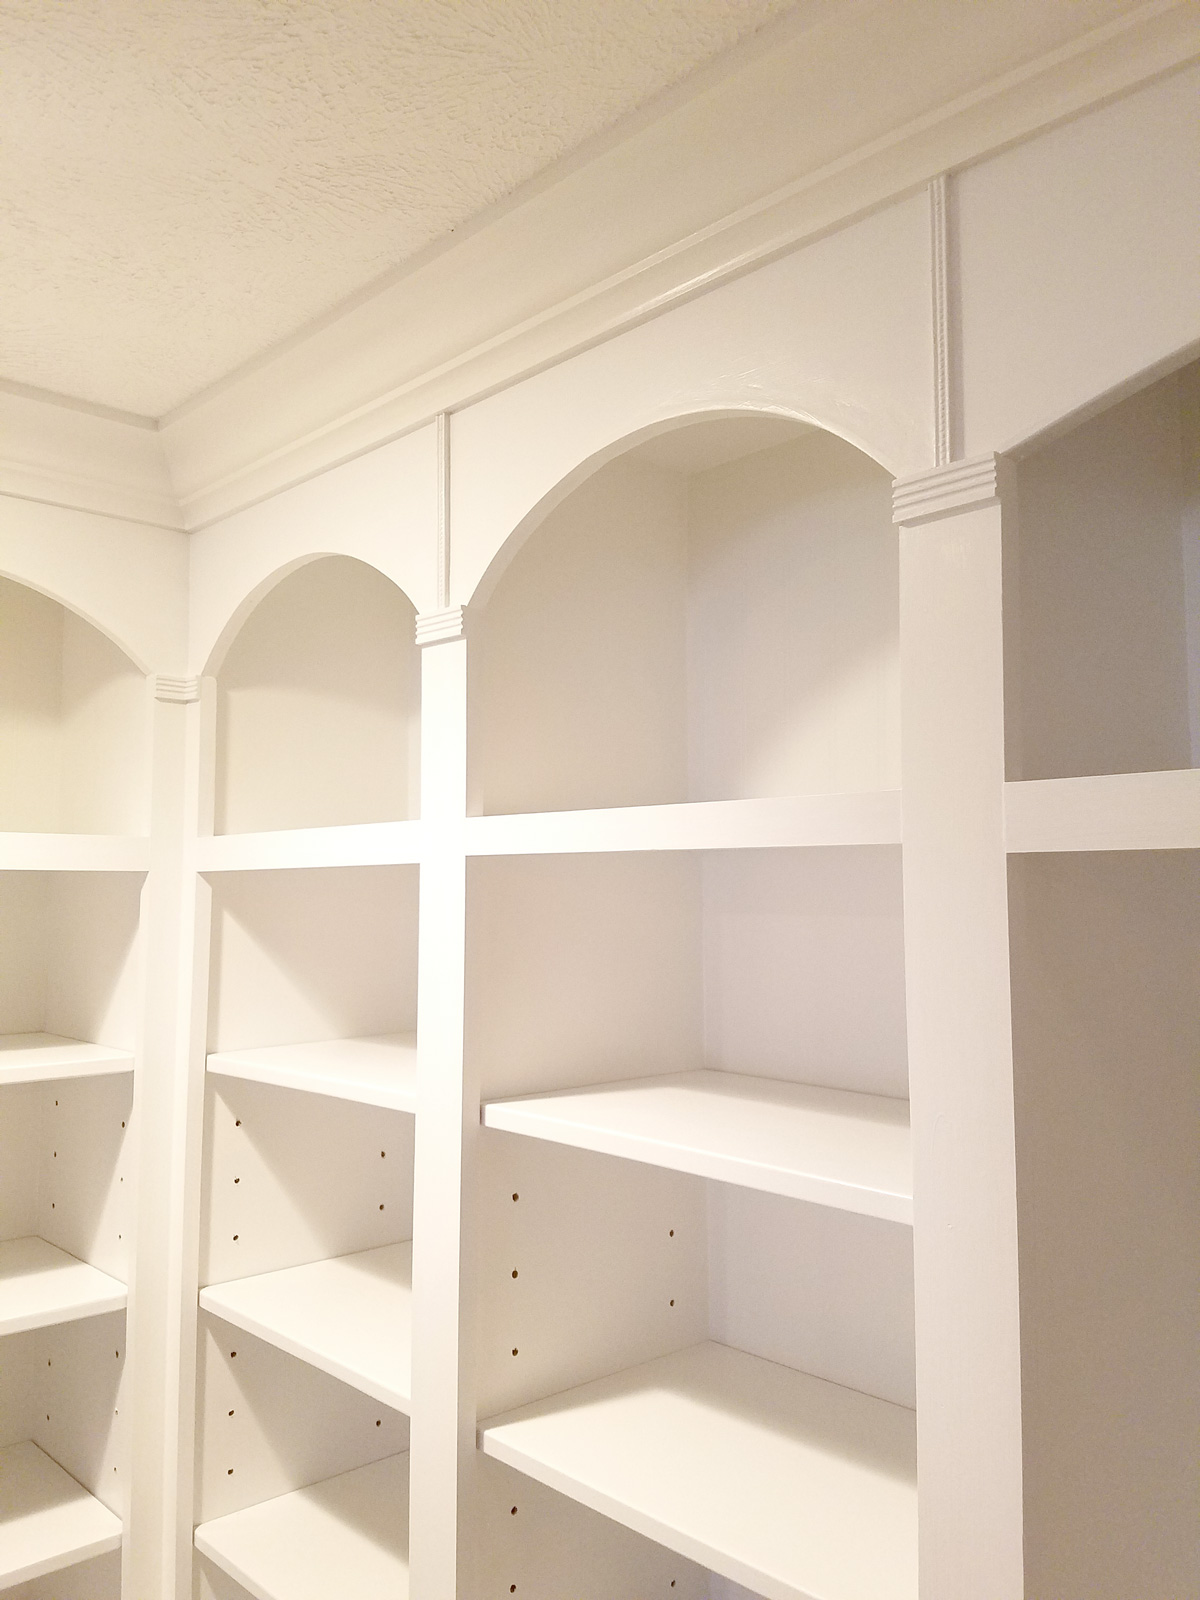 A large, white entertainment center with top shelves and bottom cabinets.